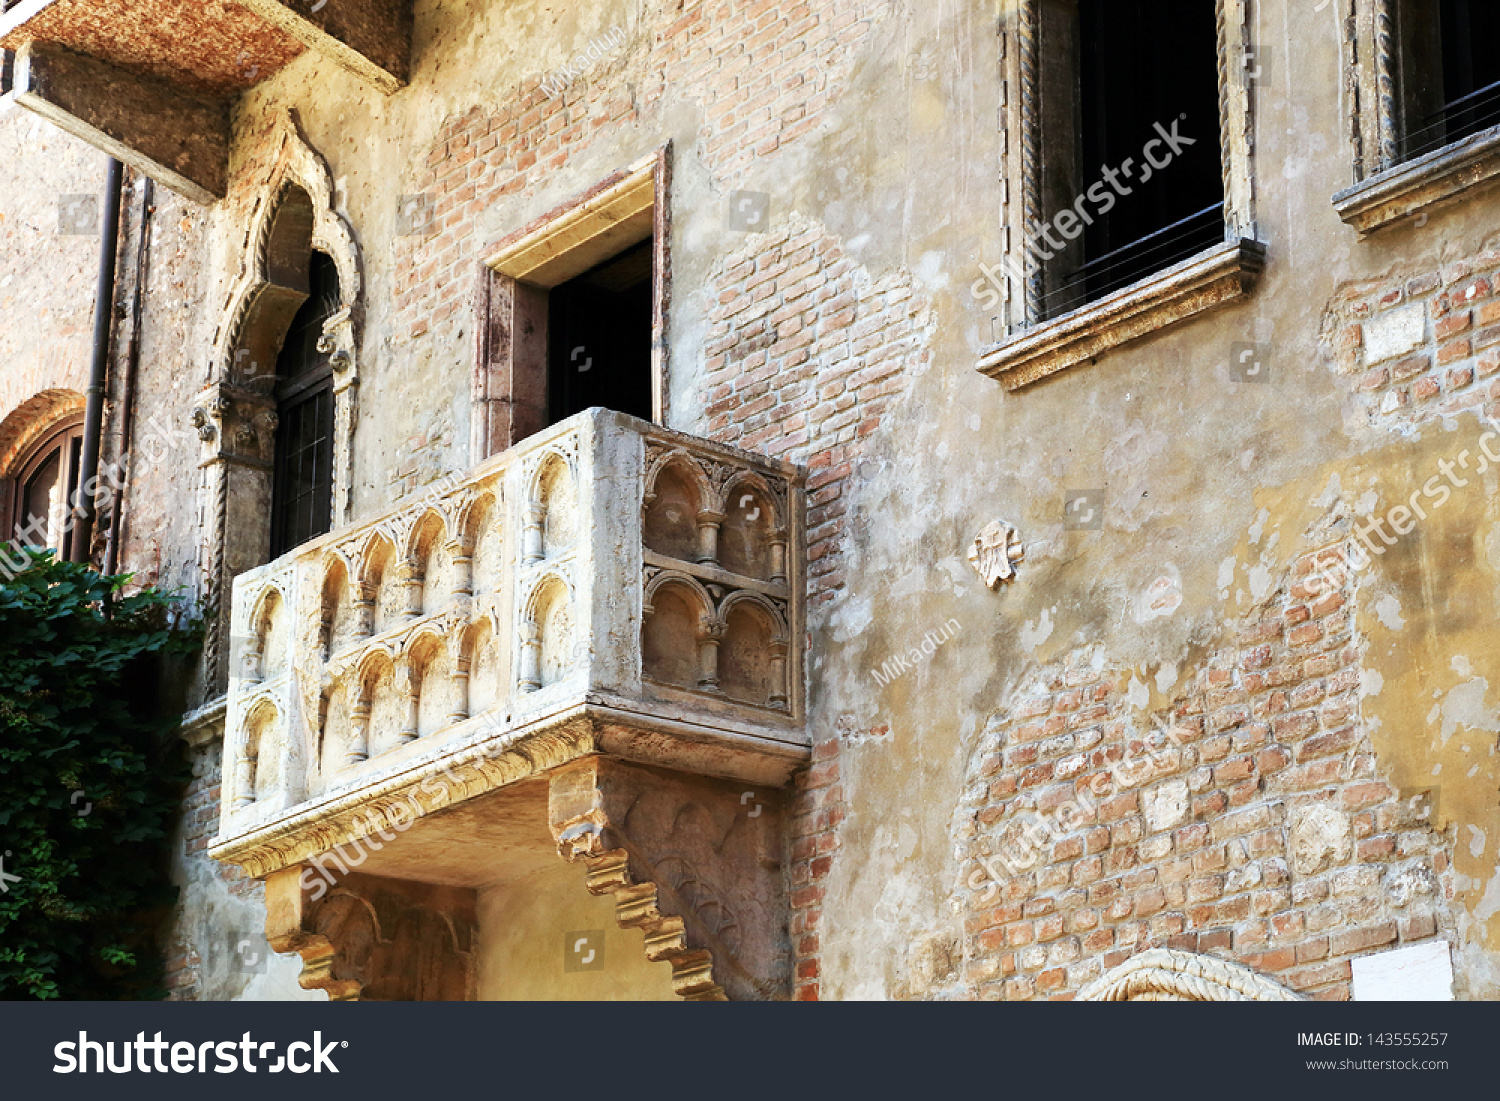 romeo and juliet background powerpoint